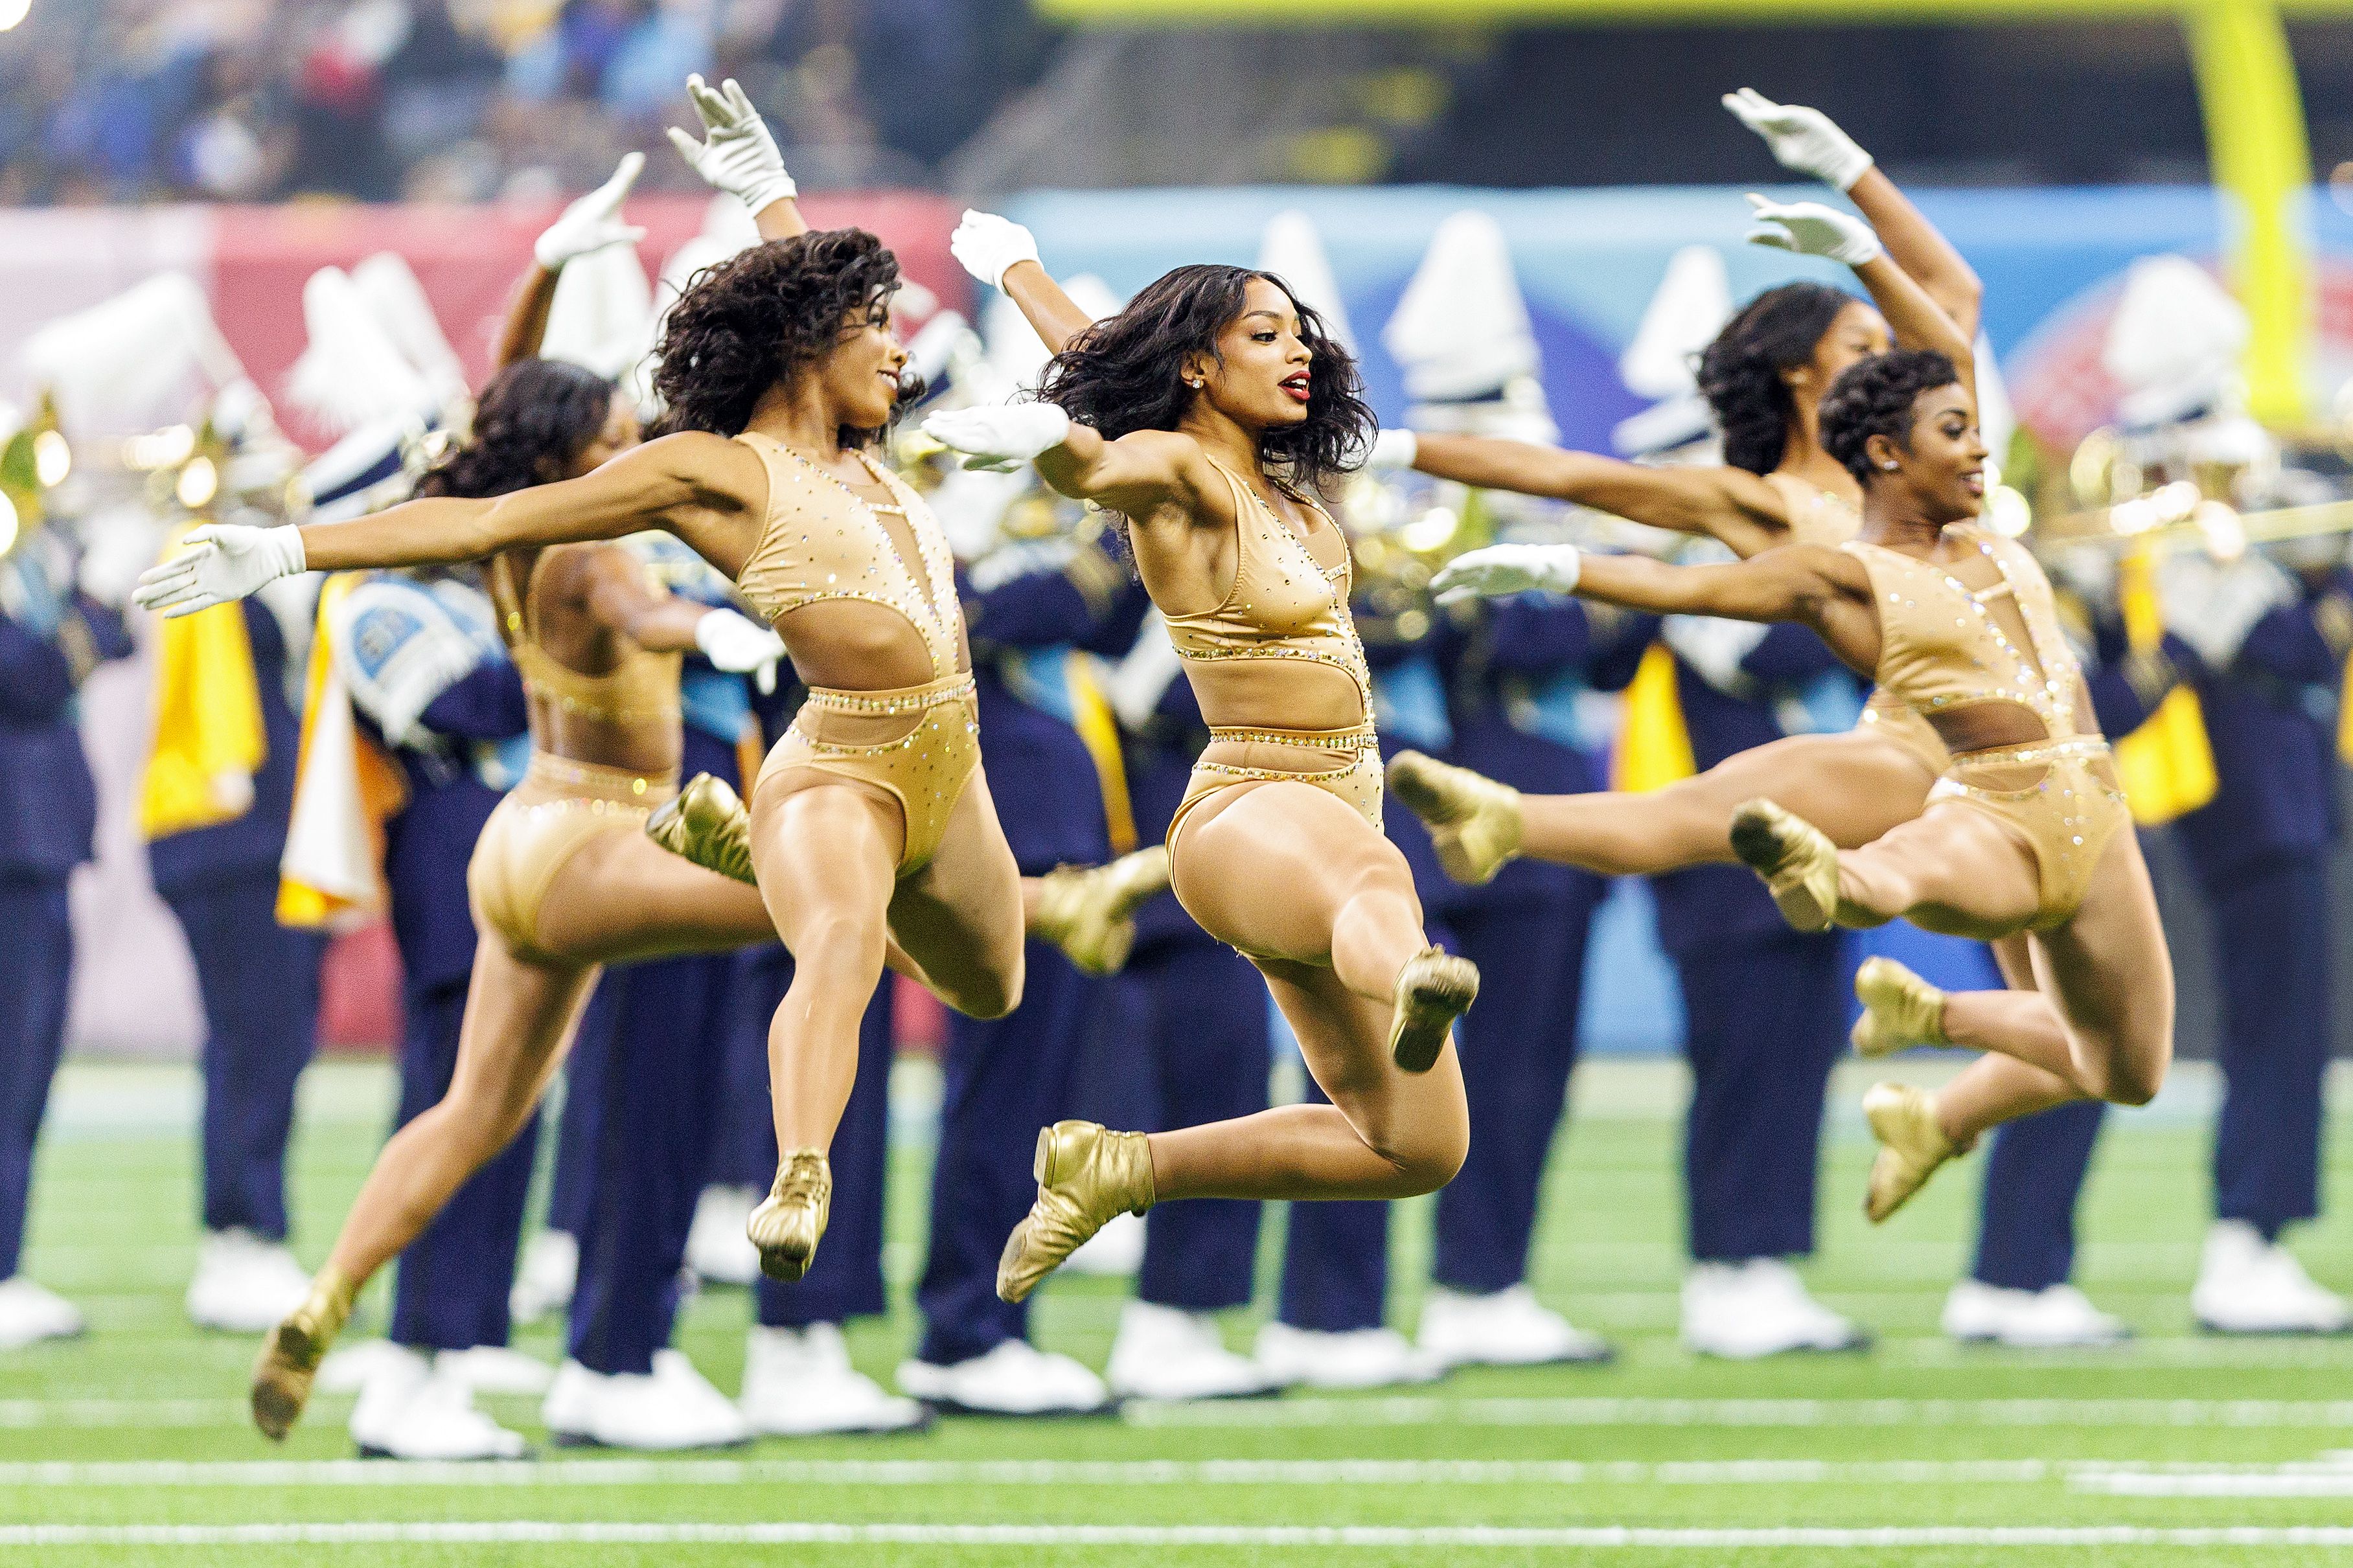 Photo shows dancers performing during the Bayou Classic